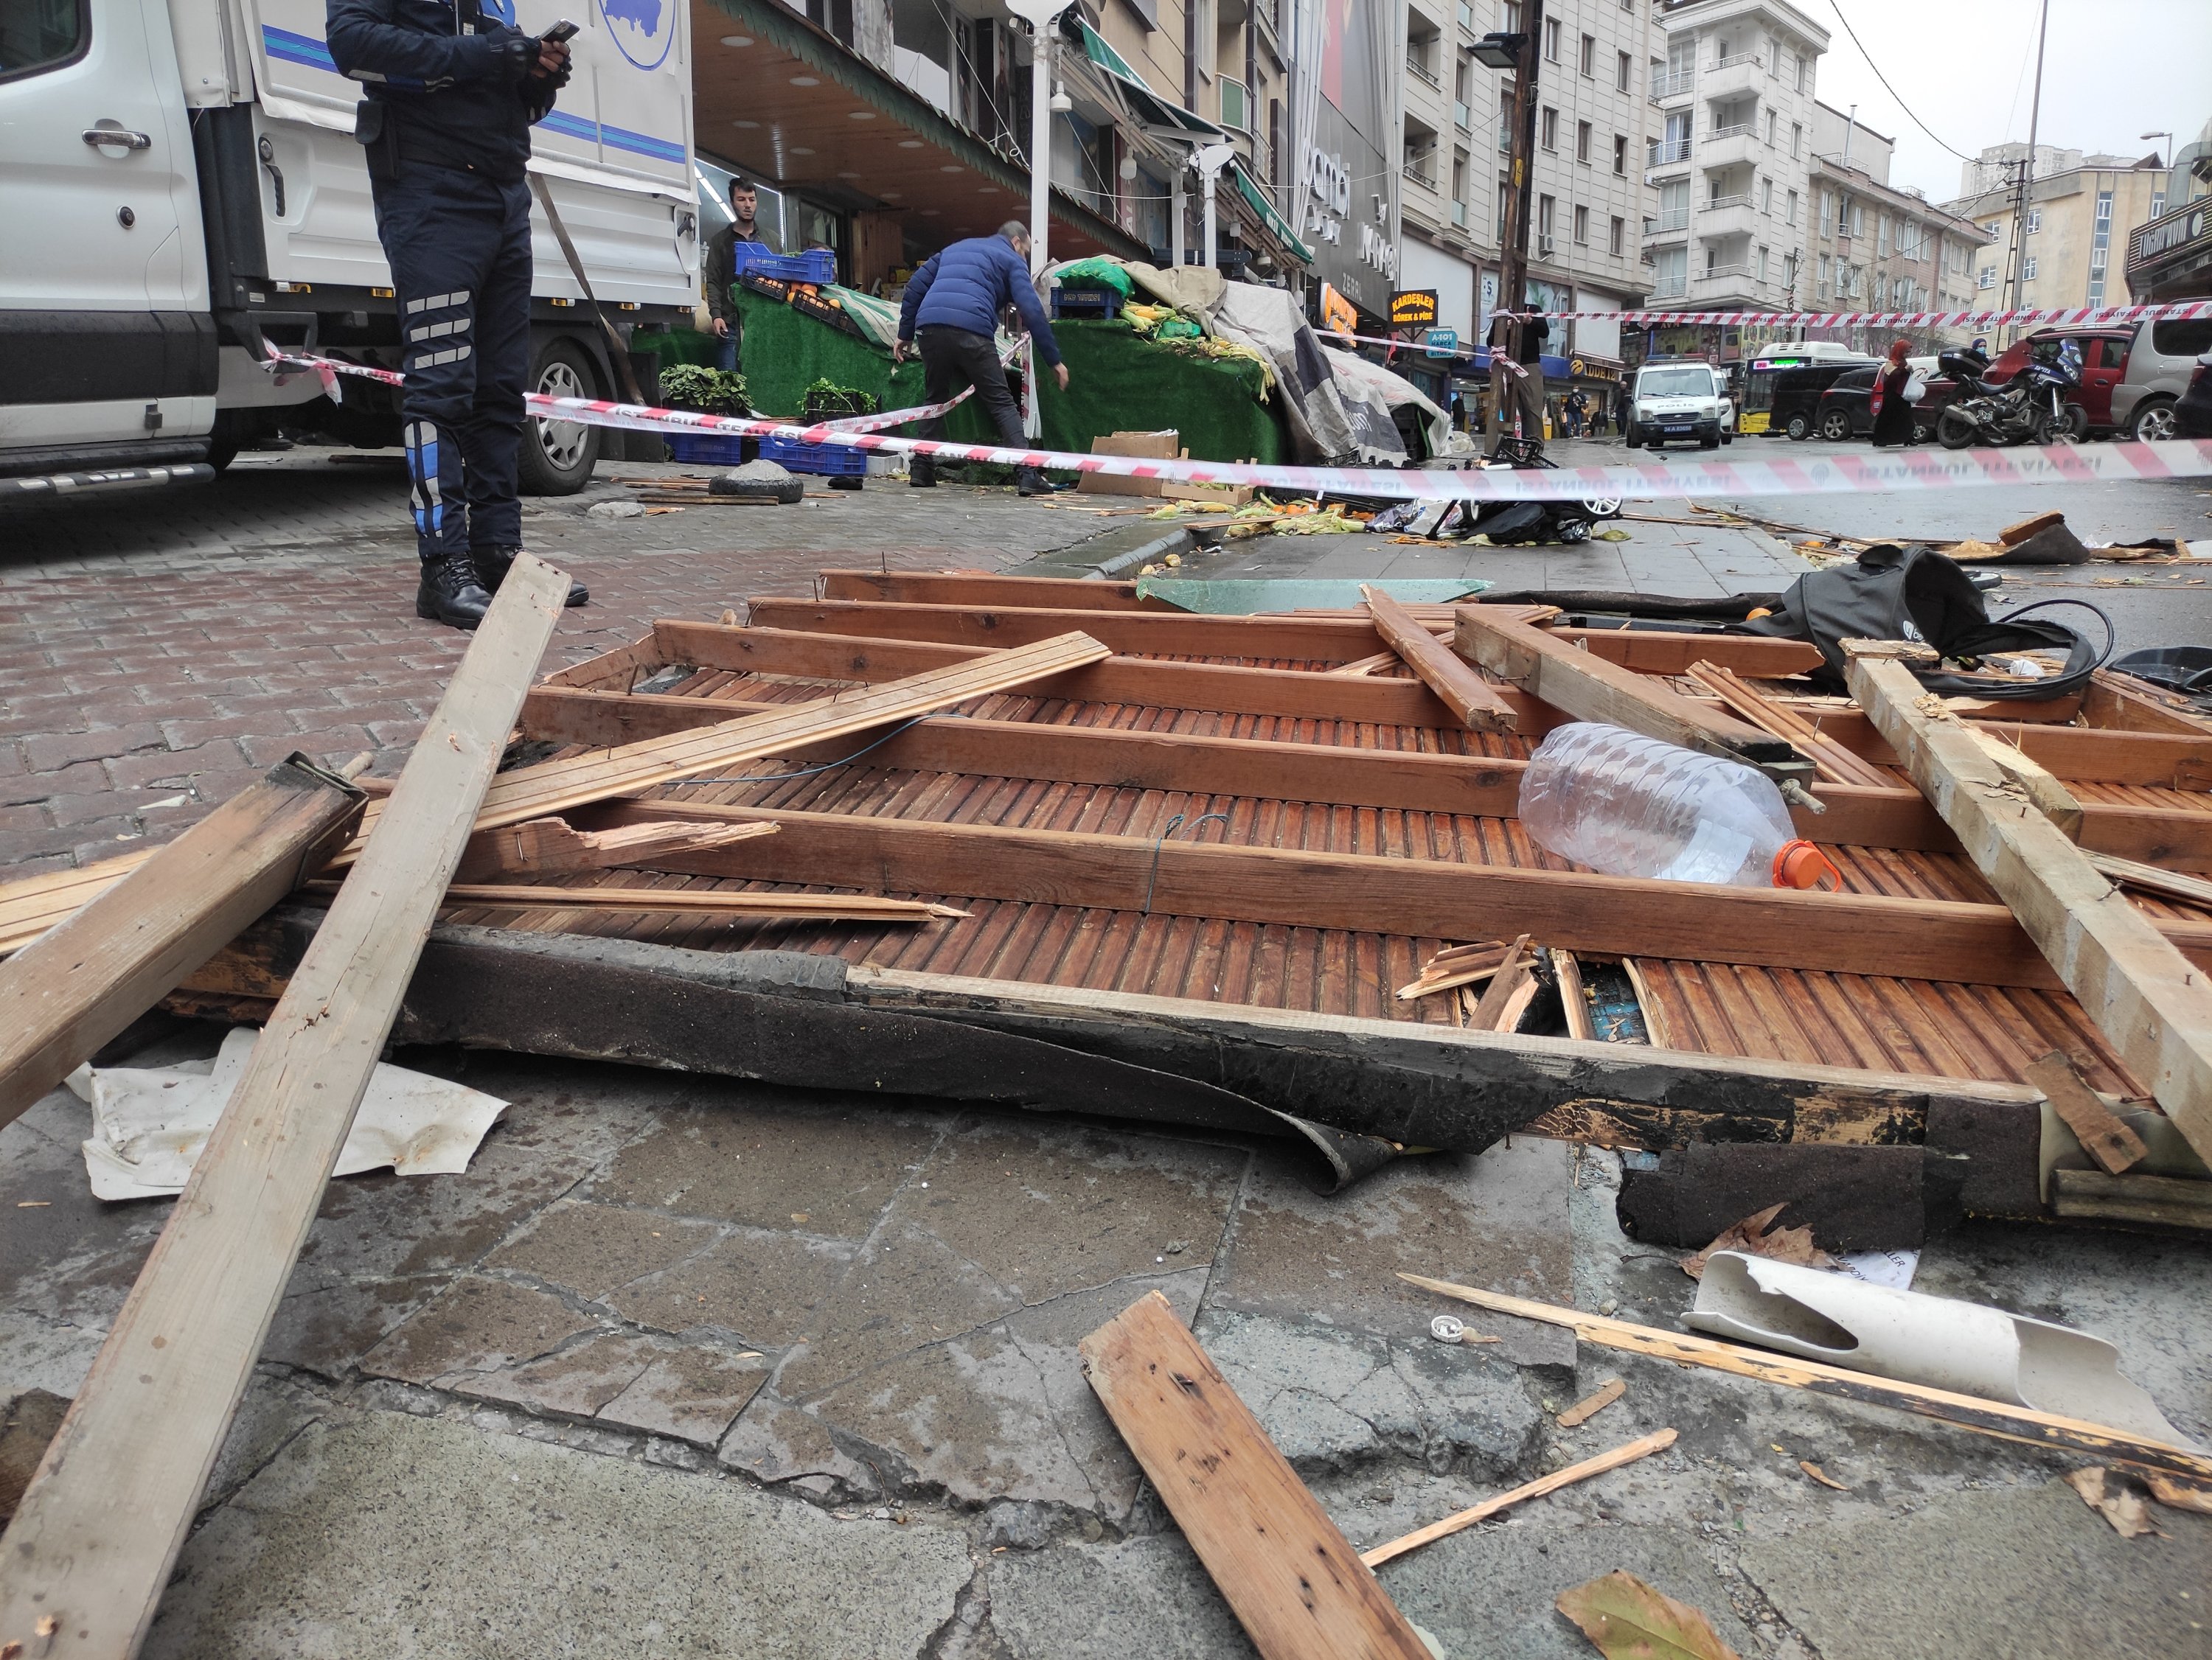 6 killed, dozens injured in heavy storms that battered Turkey Daily Sabah